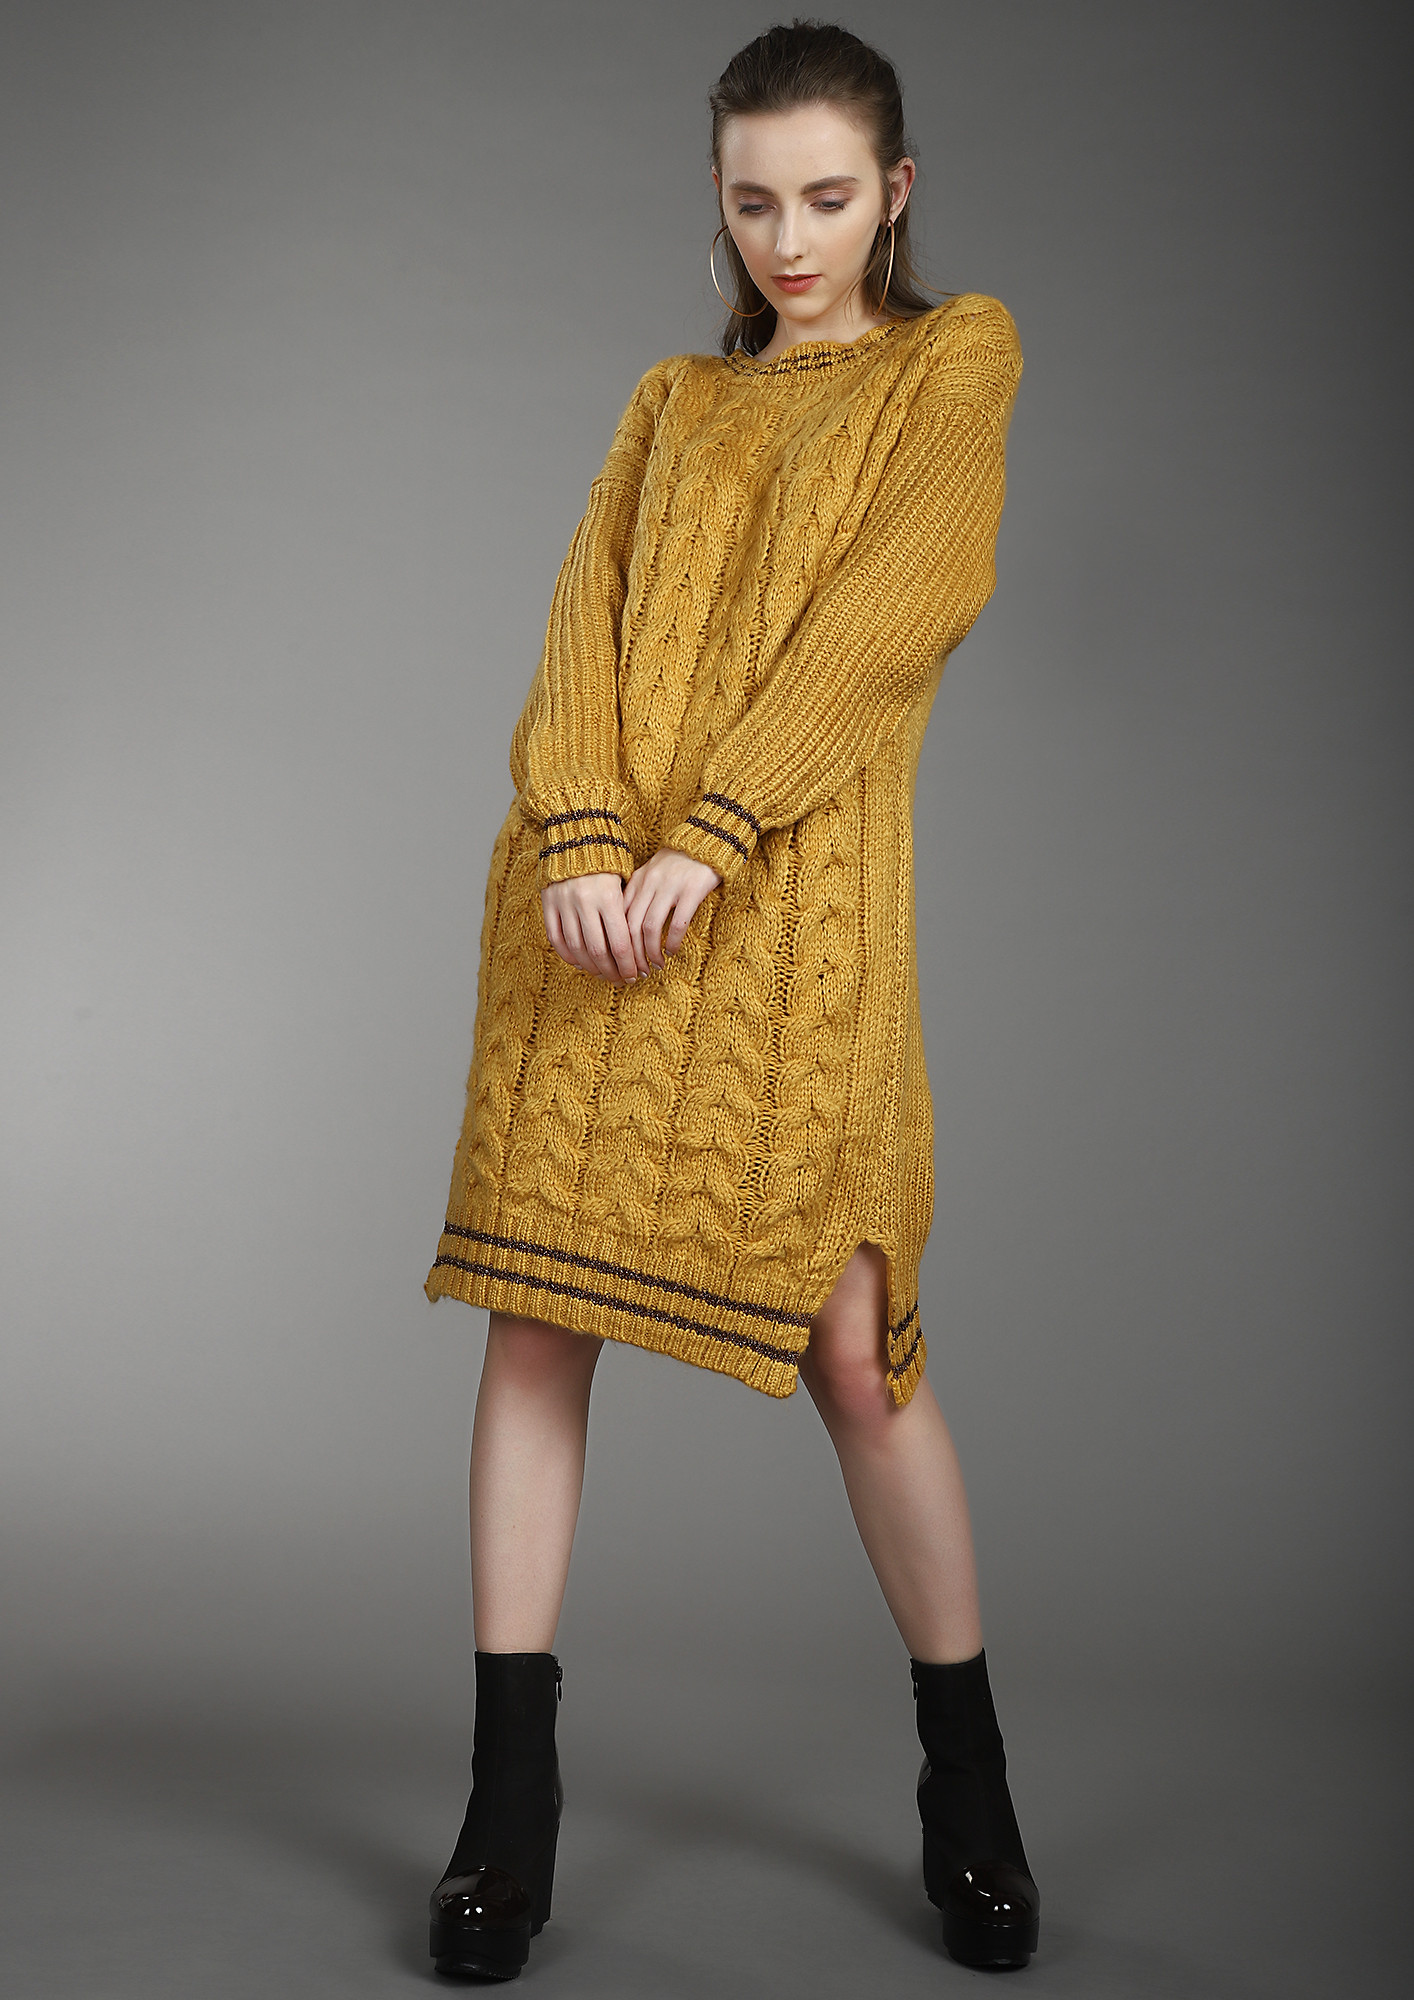 WINTER GAME RULES YELLOW KNIT DRESS